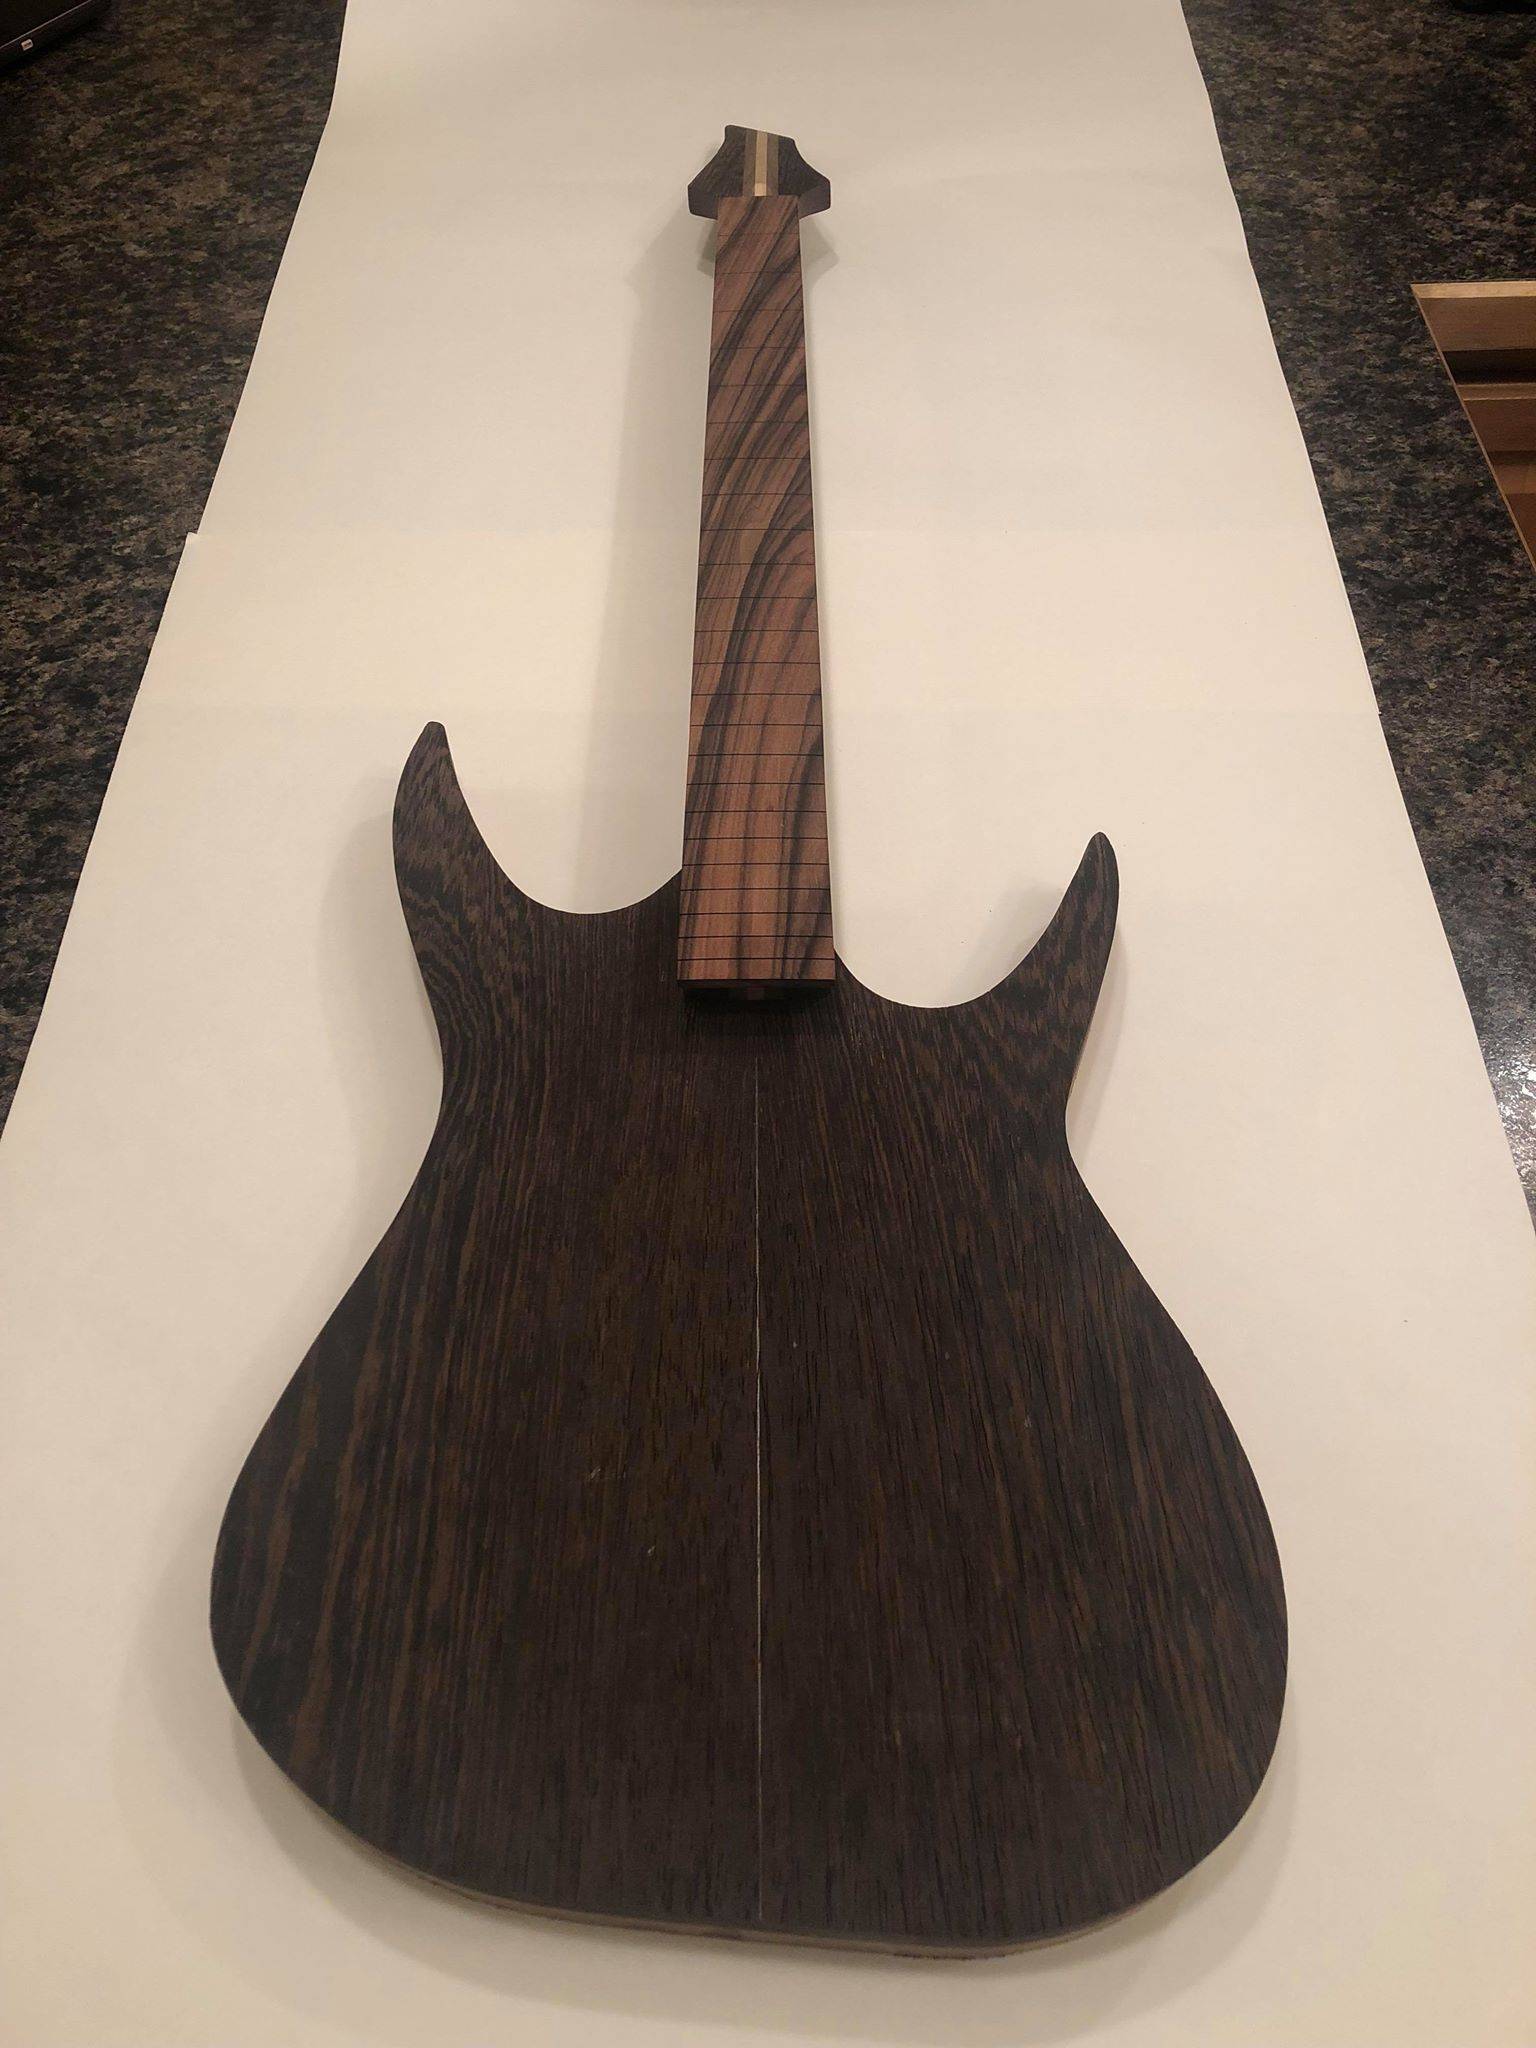 Former Juneauite Tevyn Days, who sings and plays guitar in the metal band Distance Defined, shared this photo of progress on the guitar he is currently making. (Courtesy photo | Trevyn Days)